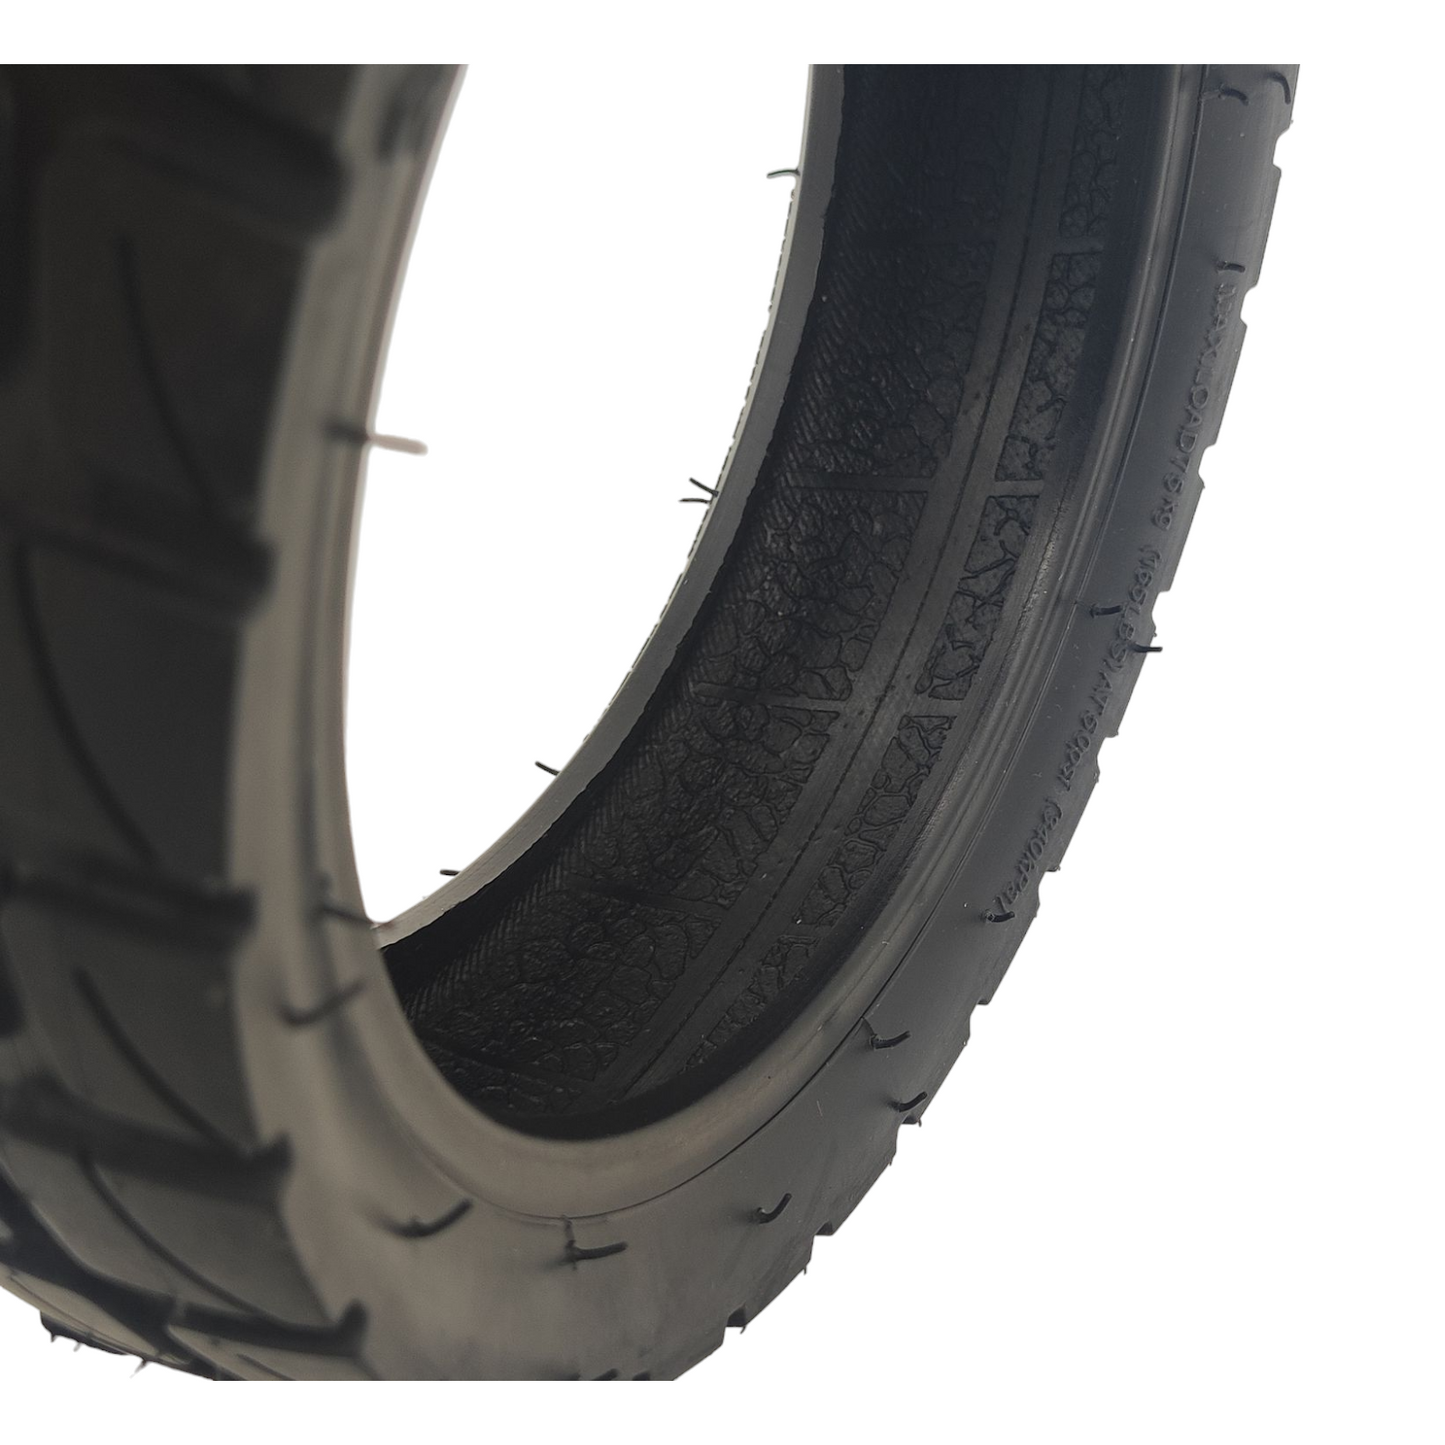 8.5x3-6.1 inch tires for Xuancheng e-scooter